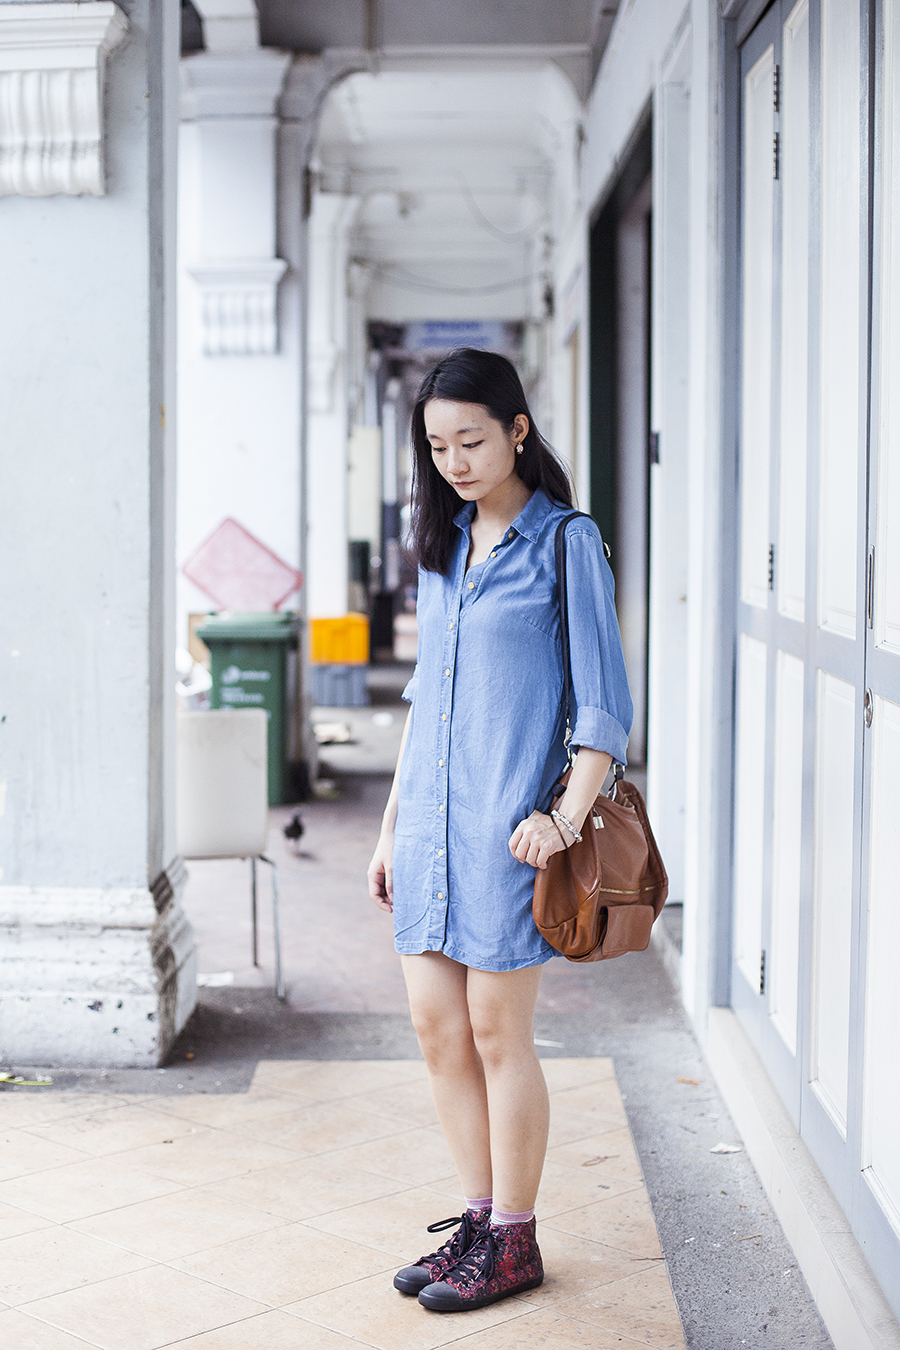 Outfit details: Uniqlo denim long-sleeved dress, Accessorize striped socks, Puma McQ Rush high top sneakers c/o Shopbop, gold flower earrings, chinese bead bracelet.